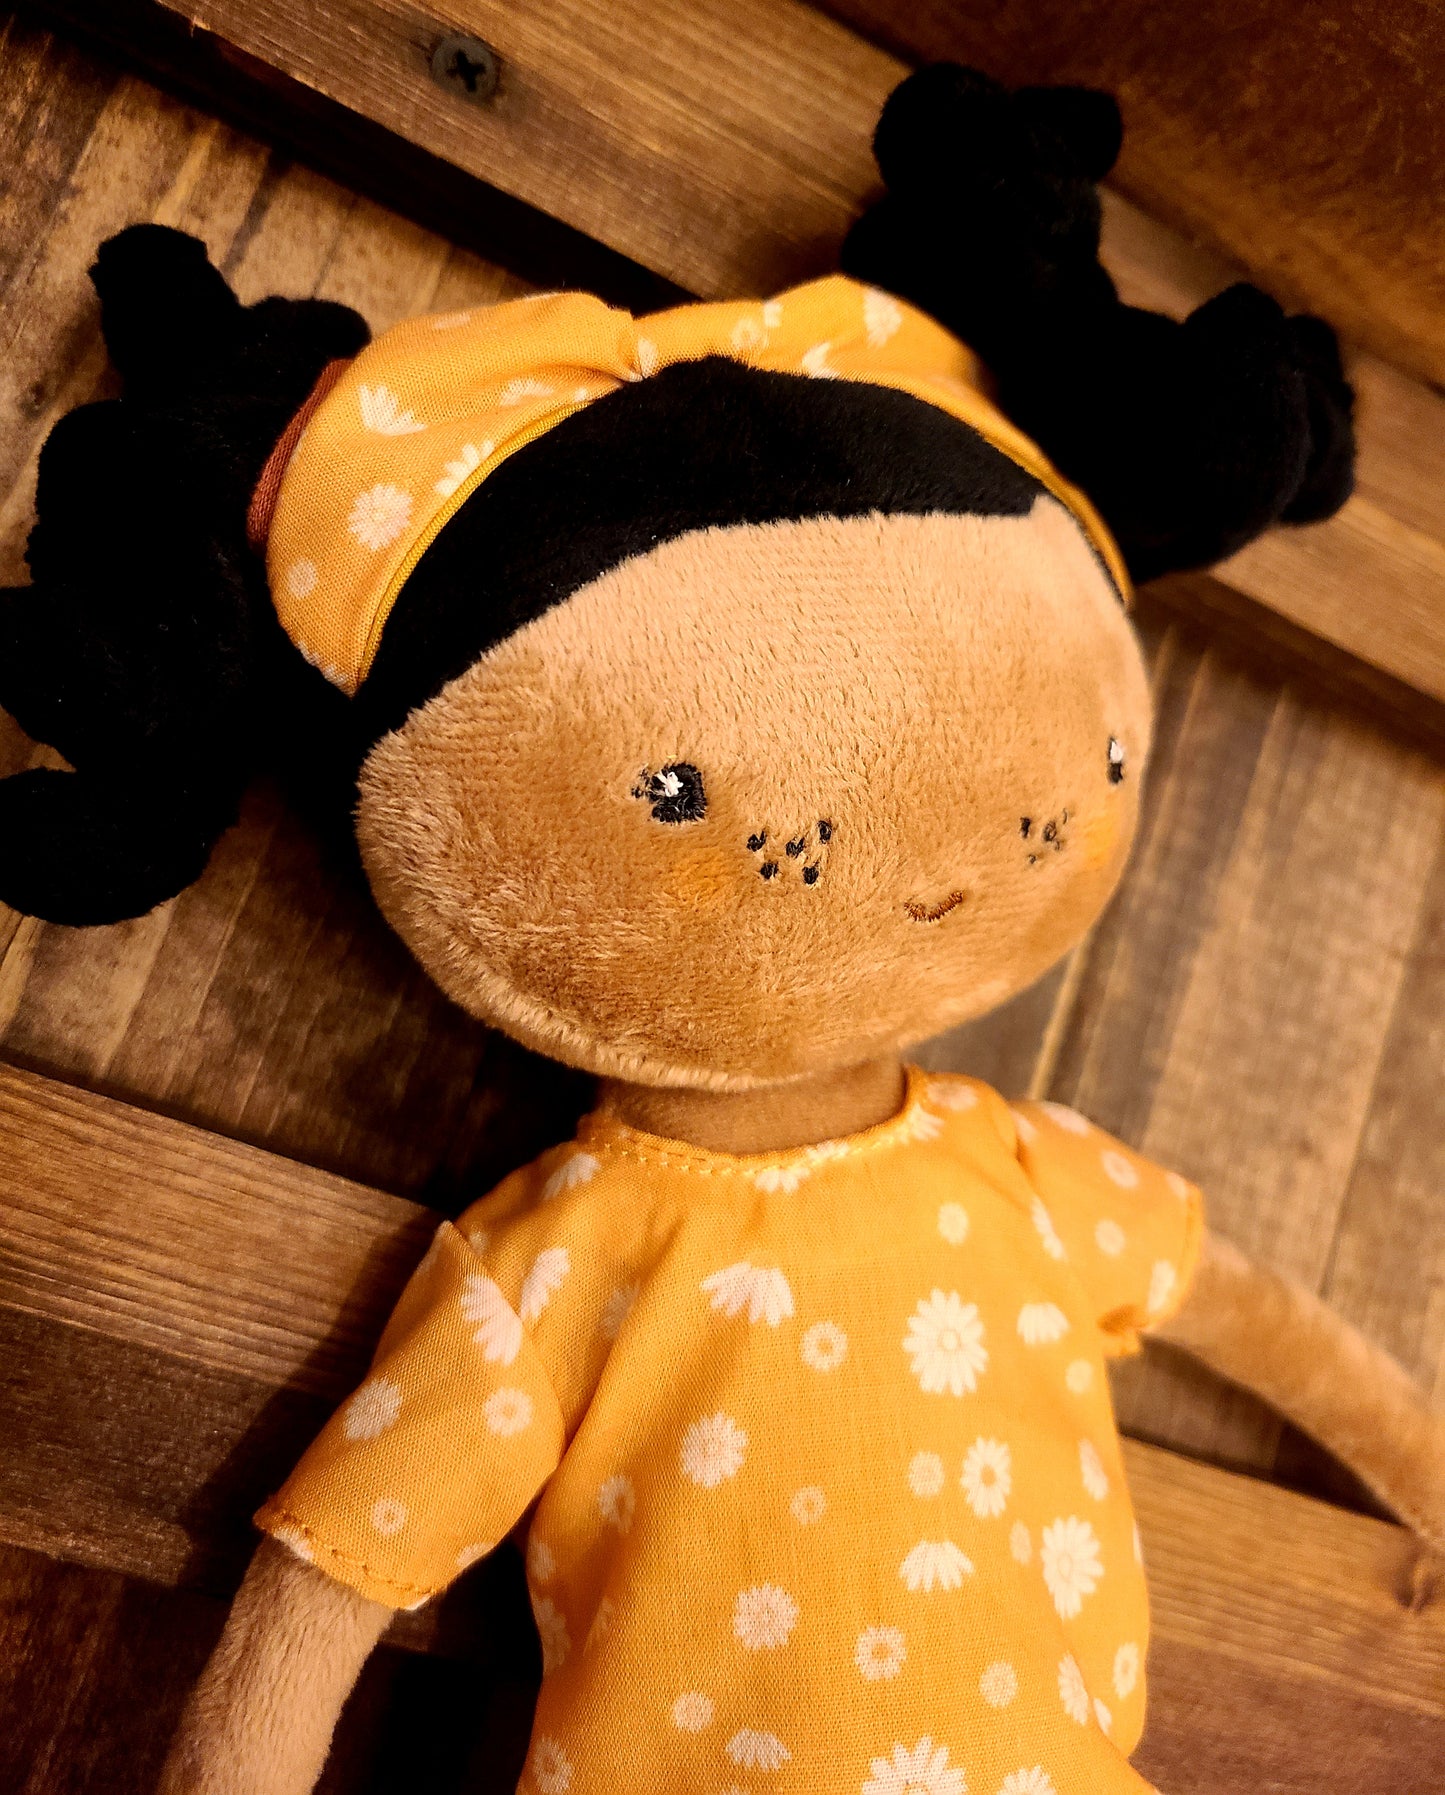 Evi Soft Rag 13" Brown Girl Plush Doll With Mustard Flower Dress/ Baby Gift Toy